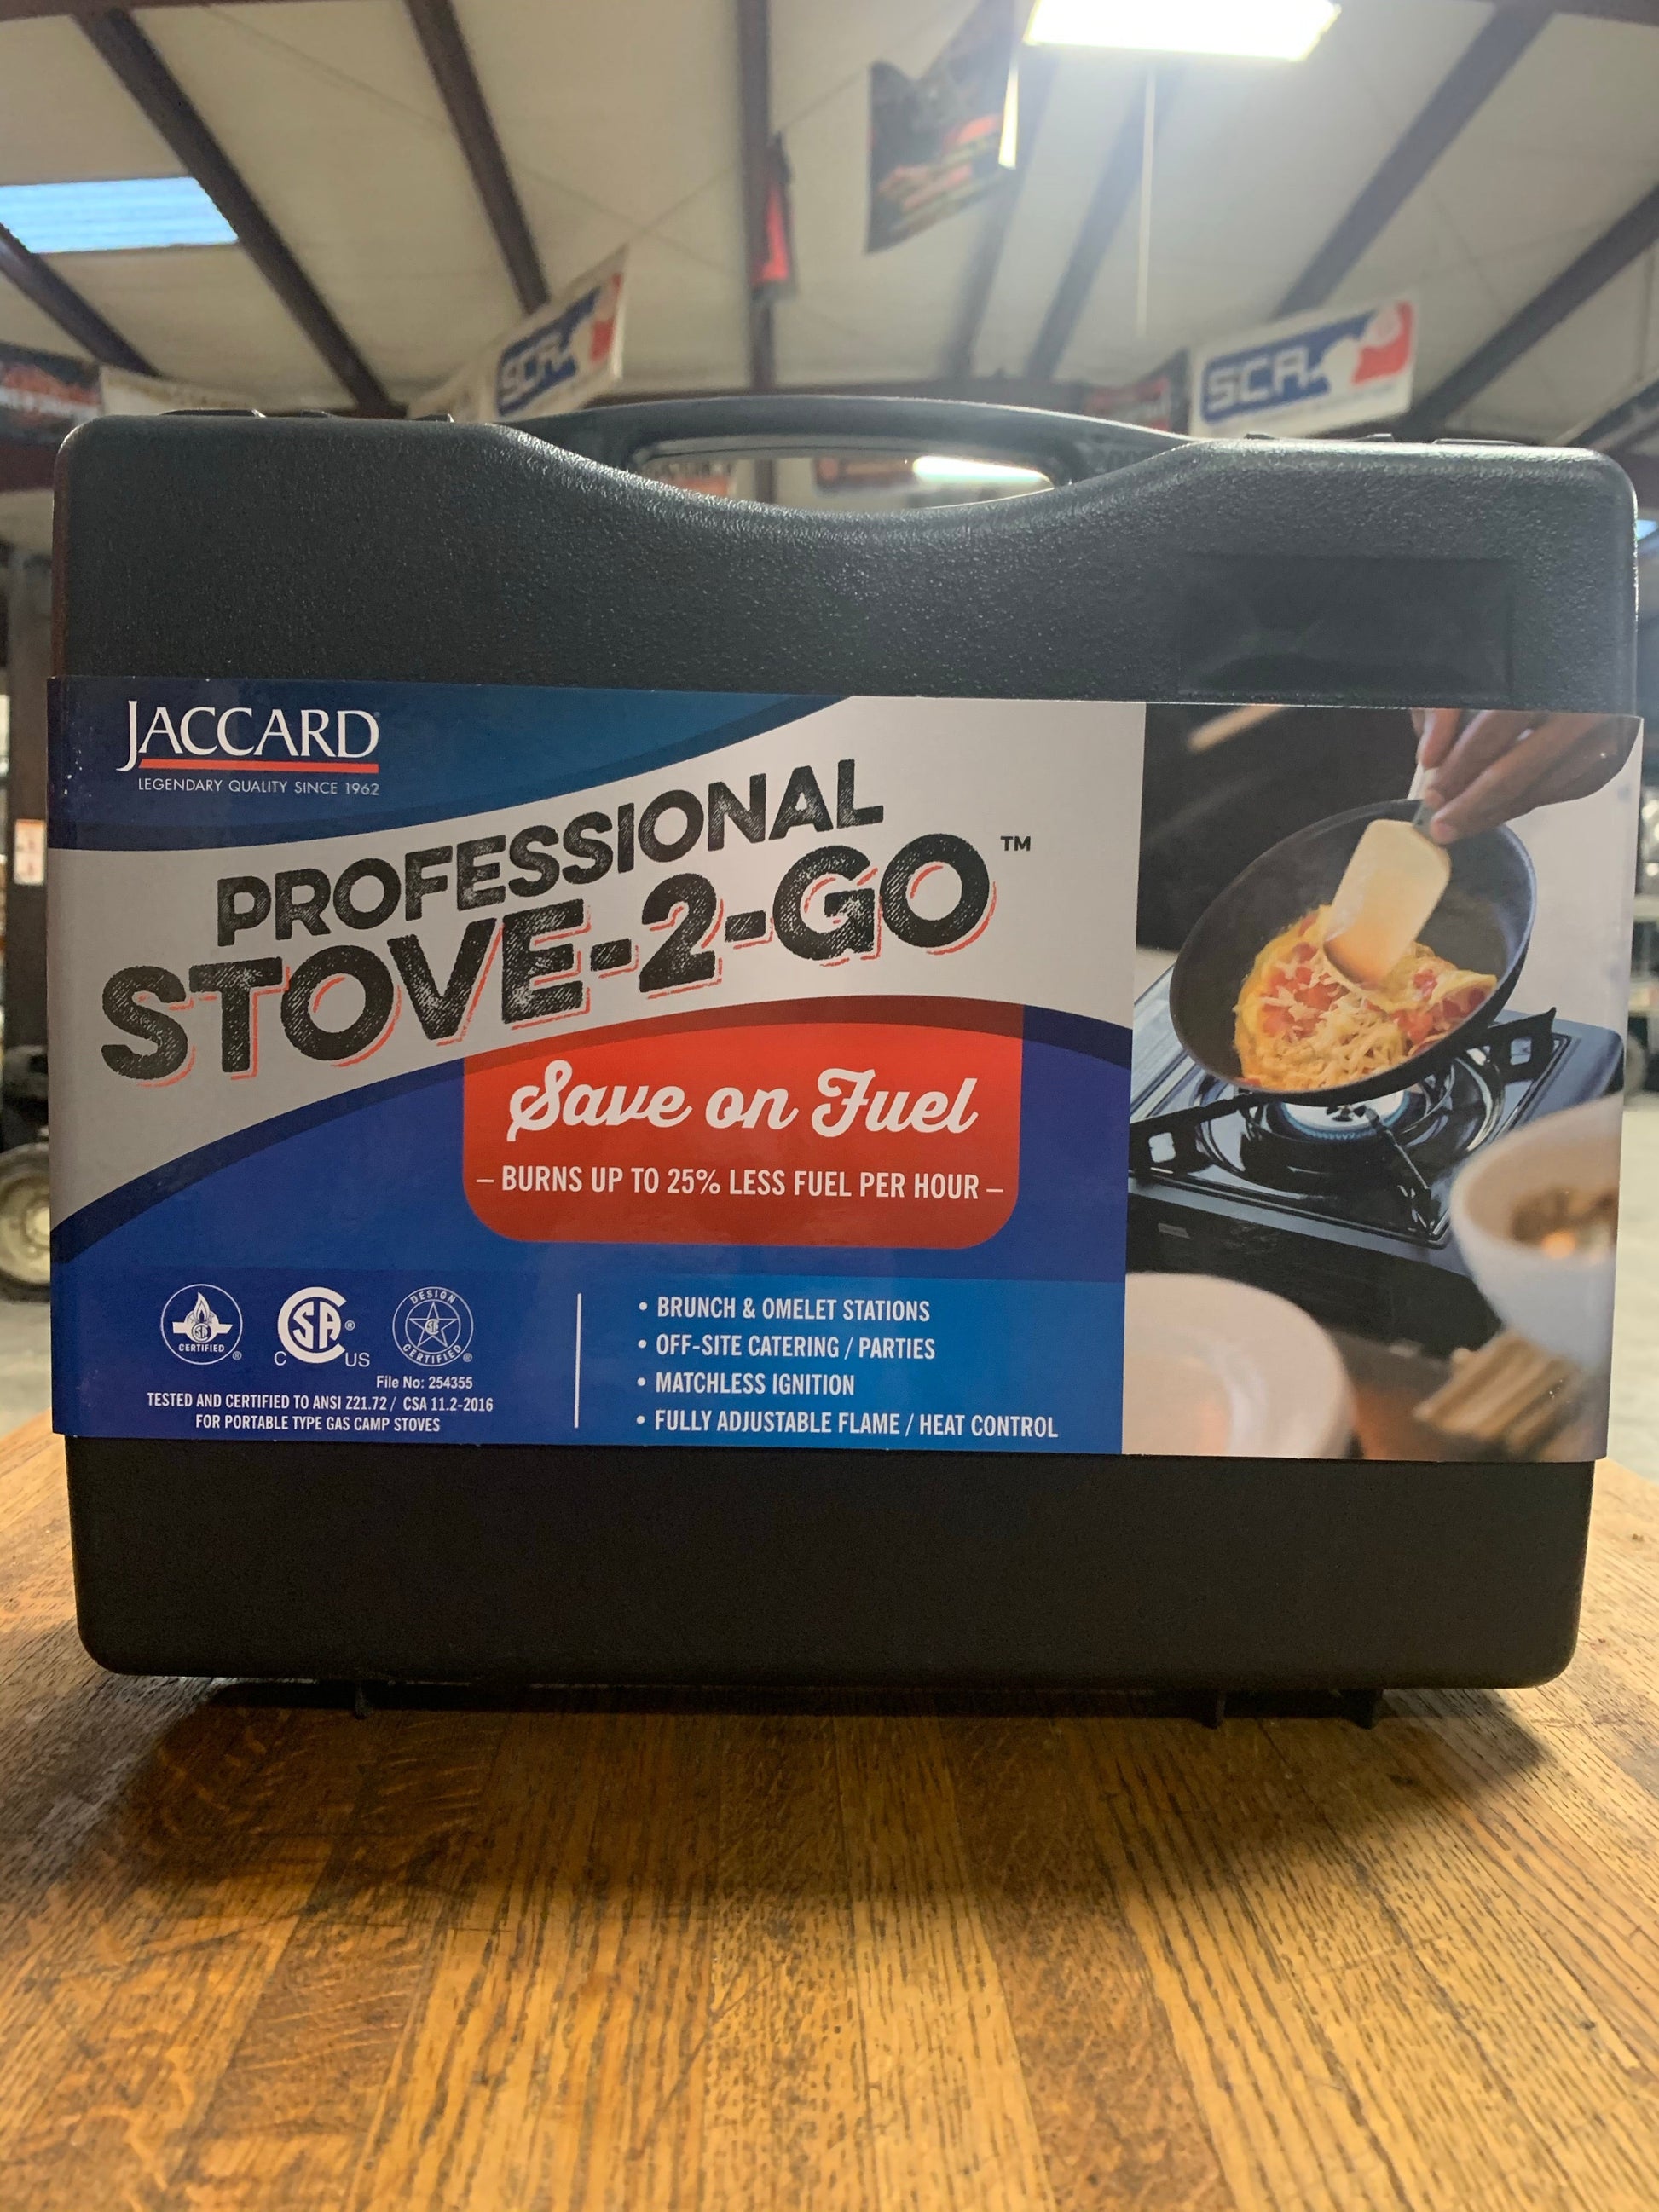 Jaccard Professional stove-2-go